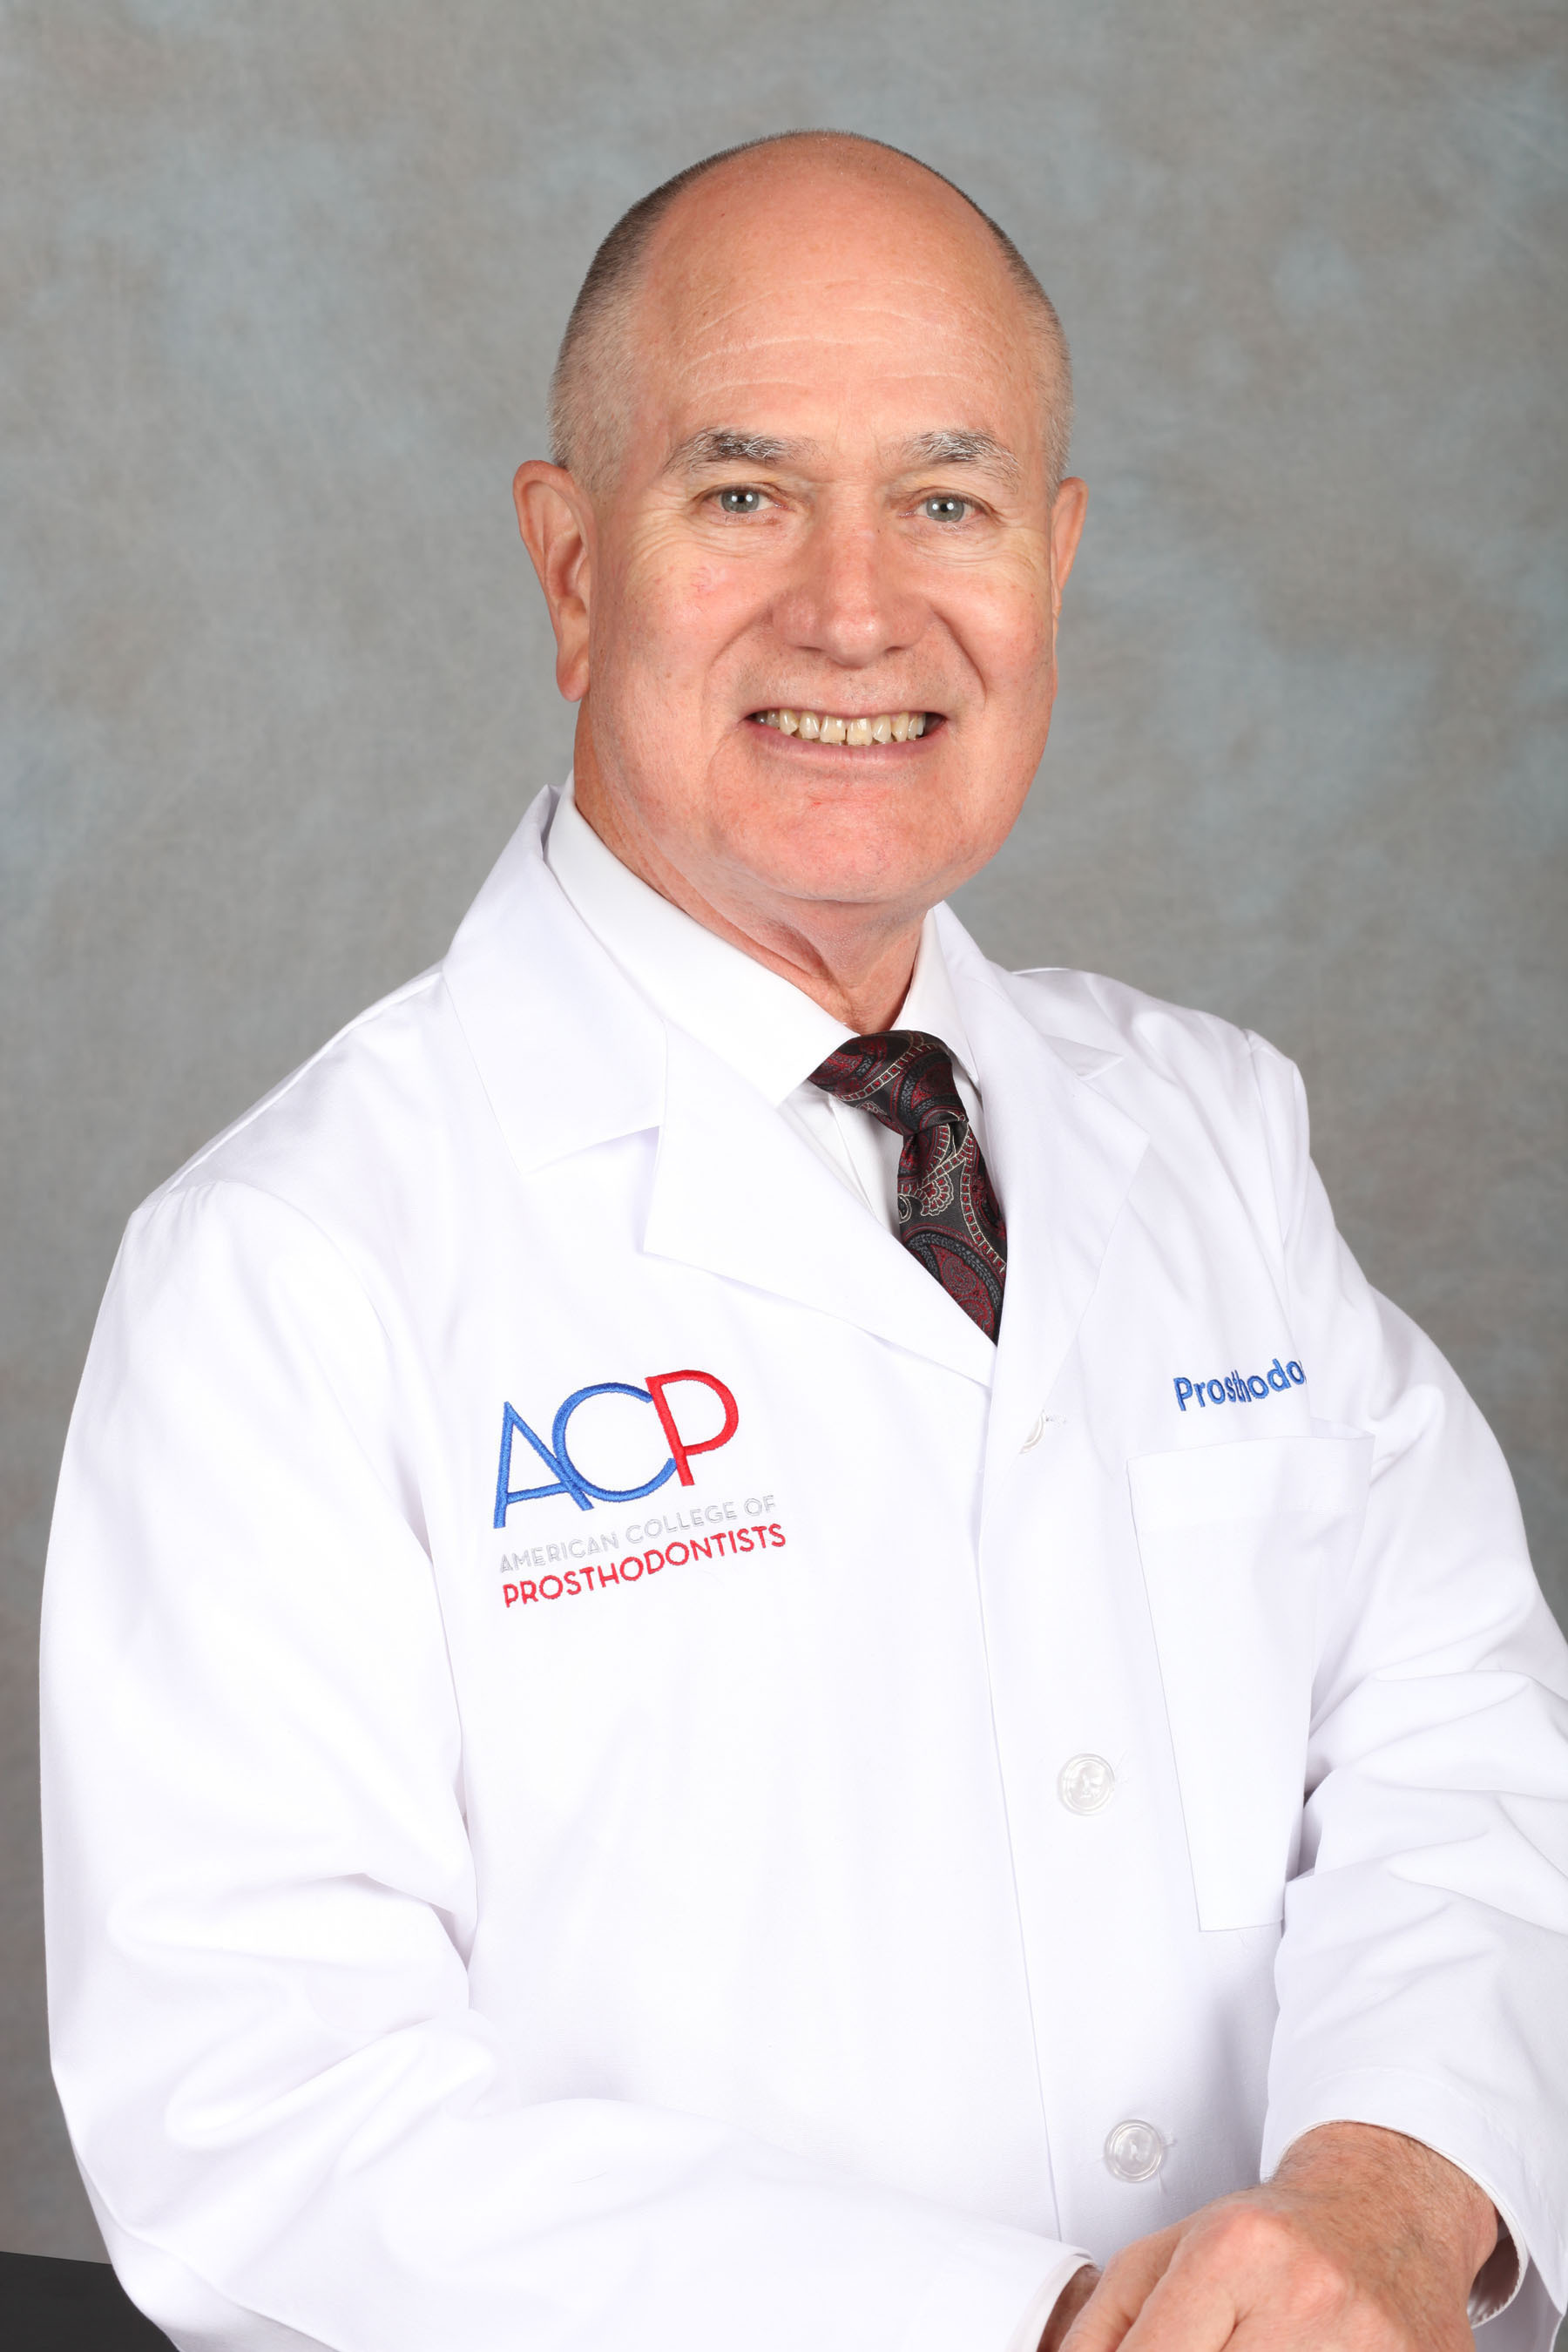 Dr. John R. Agar-The American College of Prosthodontists' President for 2013-14. GoToAPro.org. (PRNewsFoto/American College of Prosthodontists) (PRNewsFoto/AMERICAN COLLEGE OF PROSTHODO...)